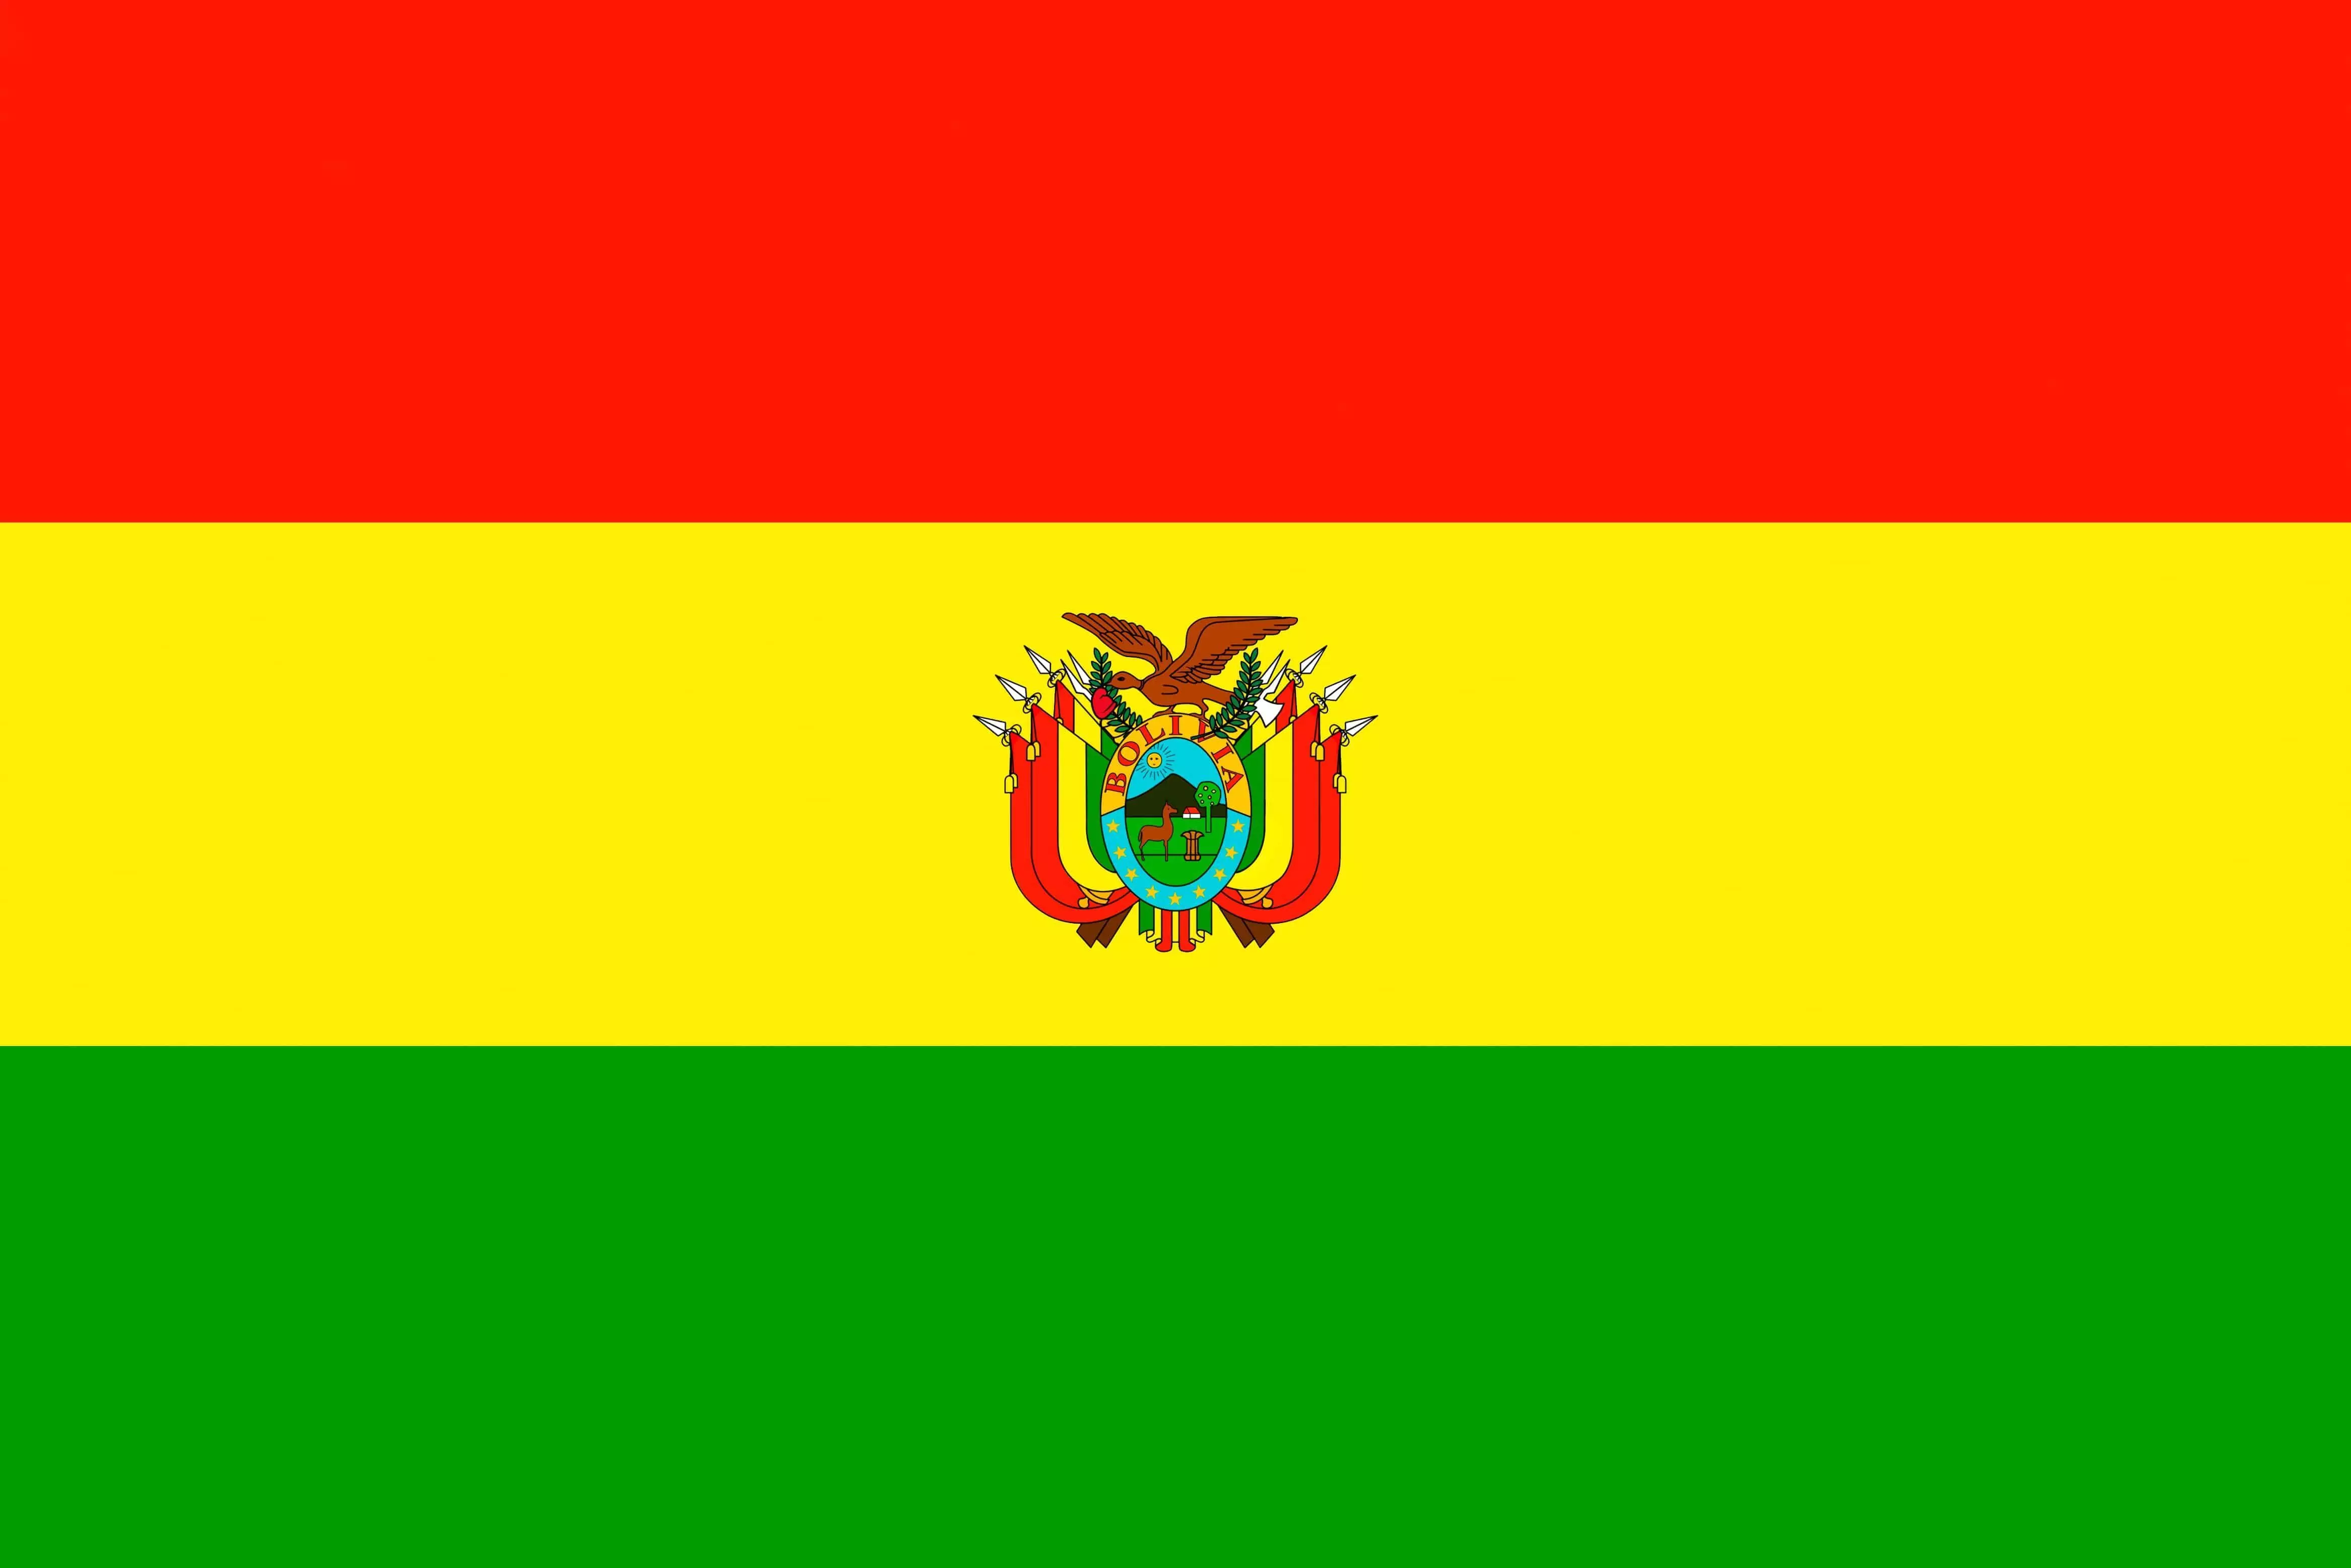 Bolivia’s health minister sacked, arrested for coronavirus-related corruption.